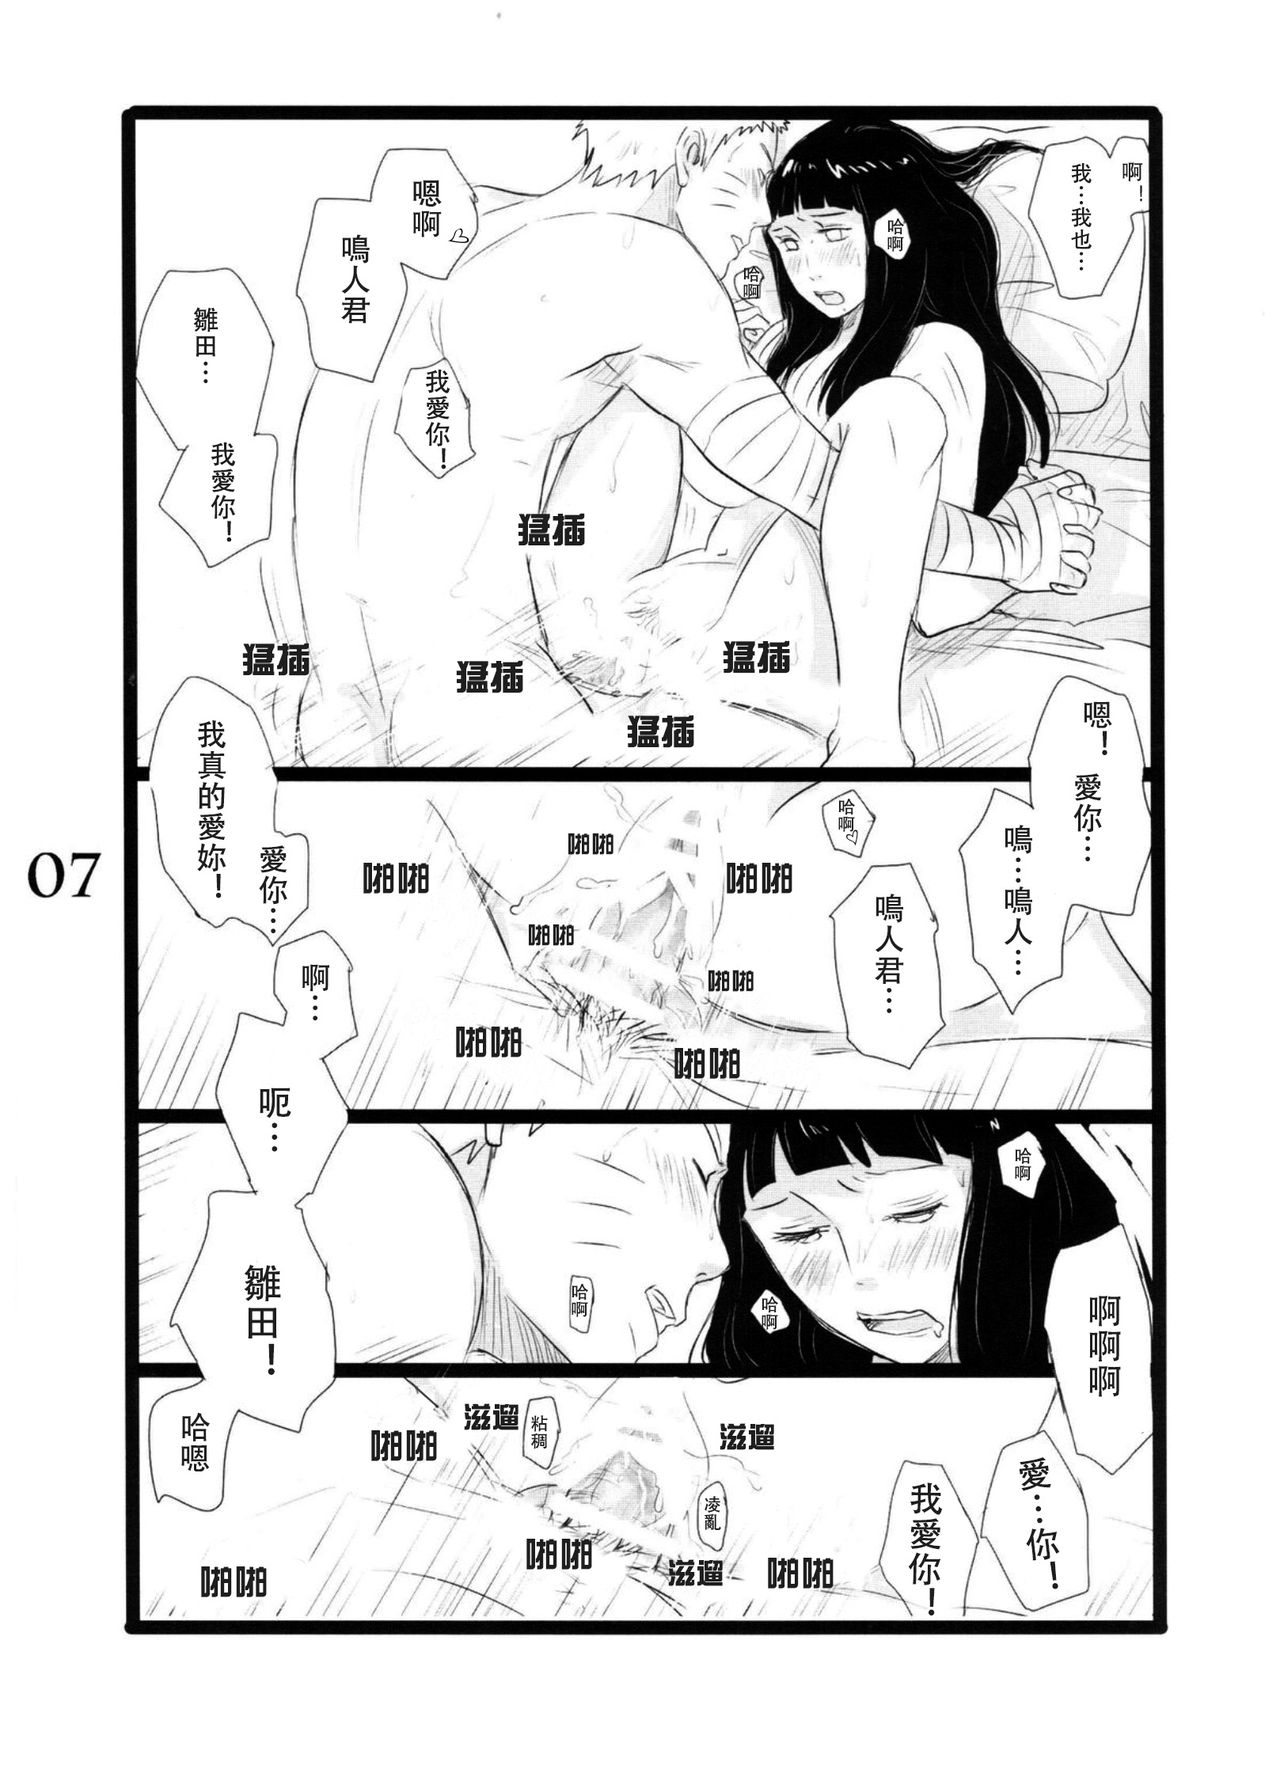 (C88) [blink (shimoyake)] YOUR MY SWEET - I LOVE YOU DARLING (Naruto) [Chinese] [沒有漢化] page 8 full